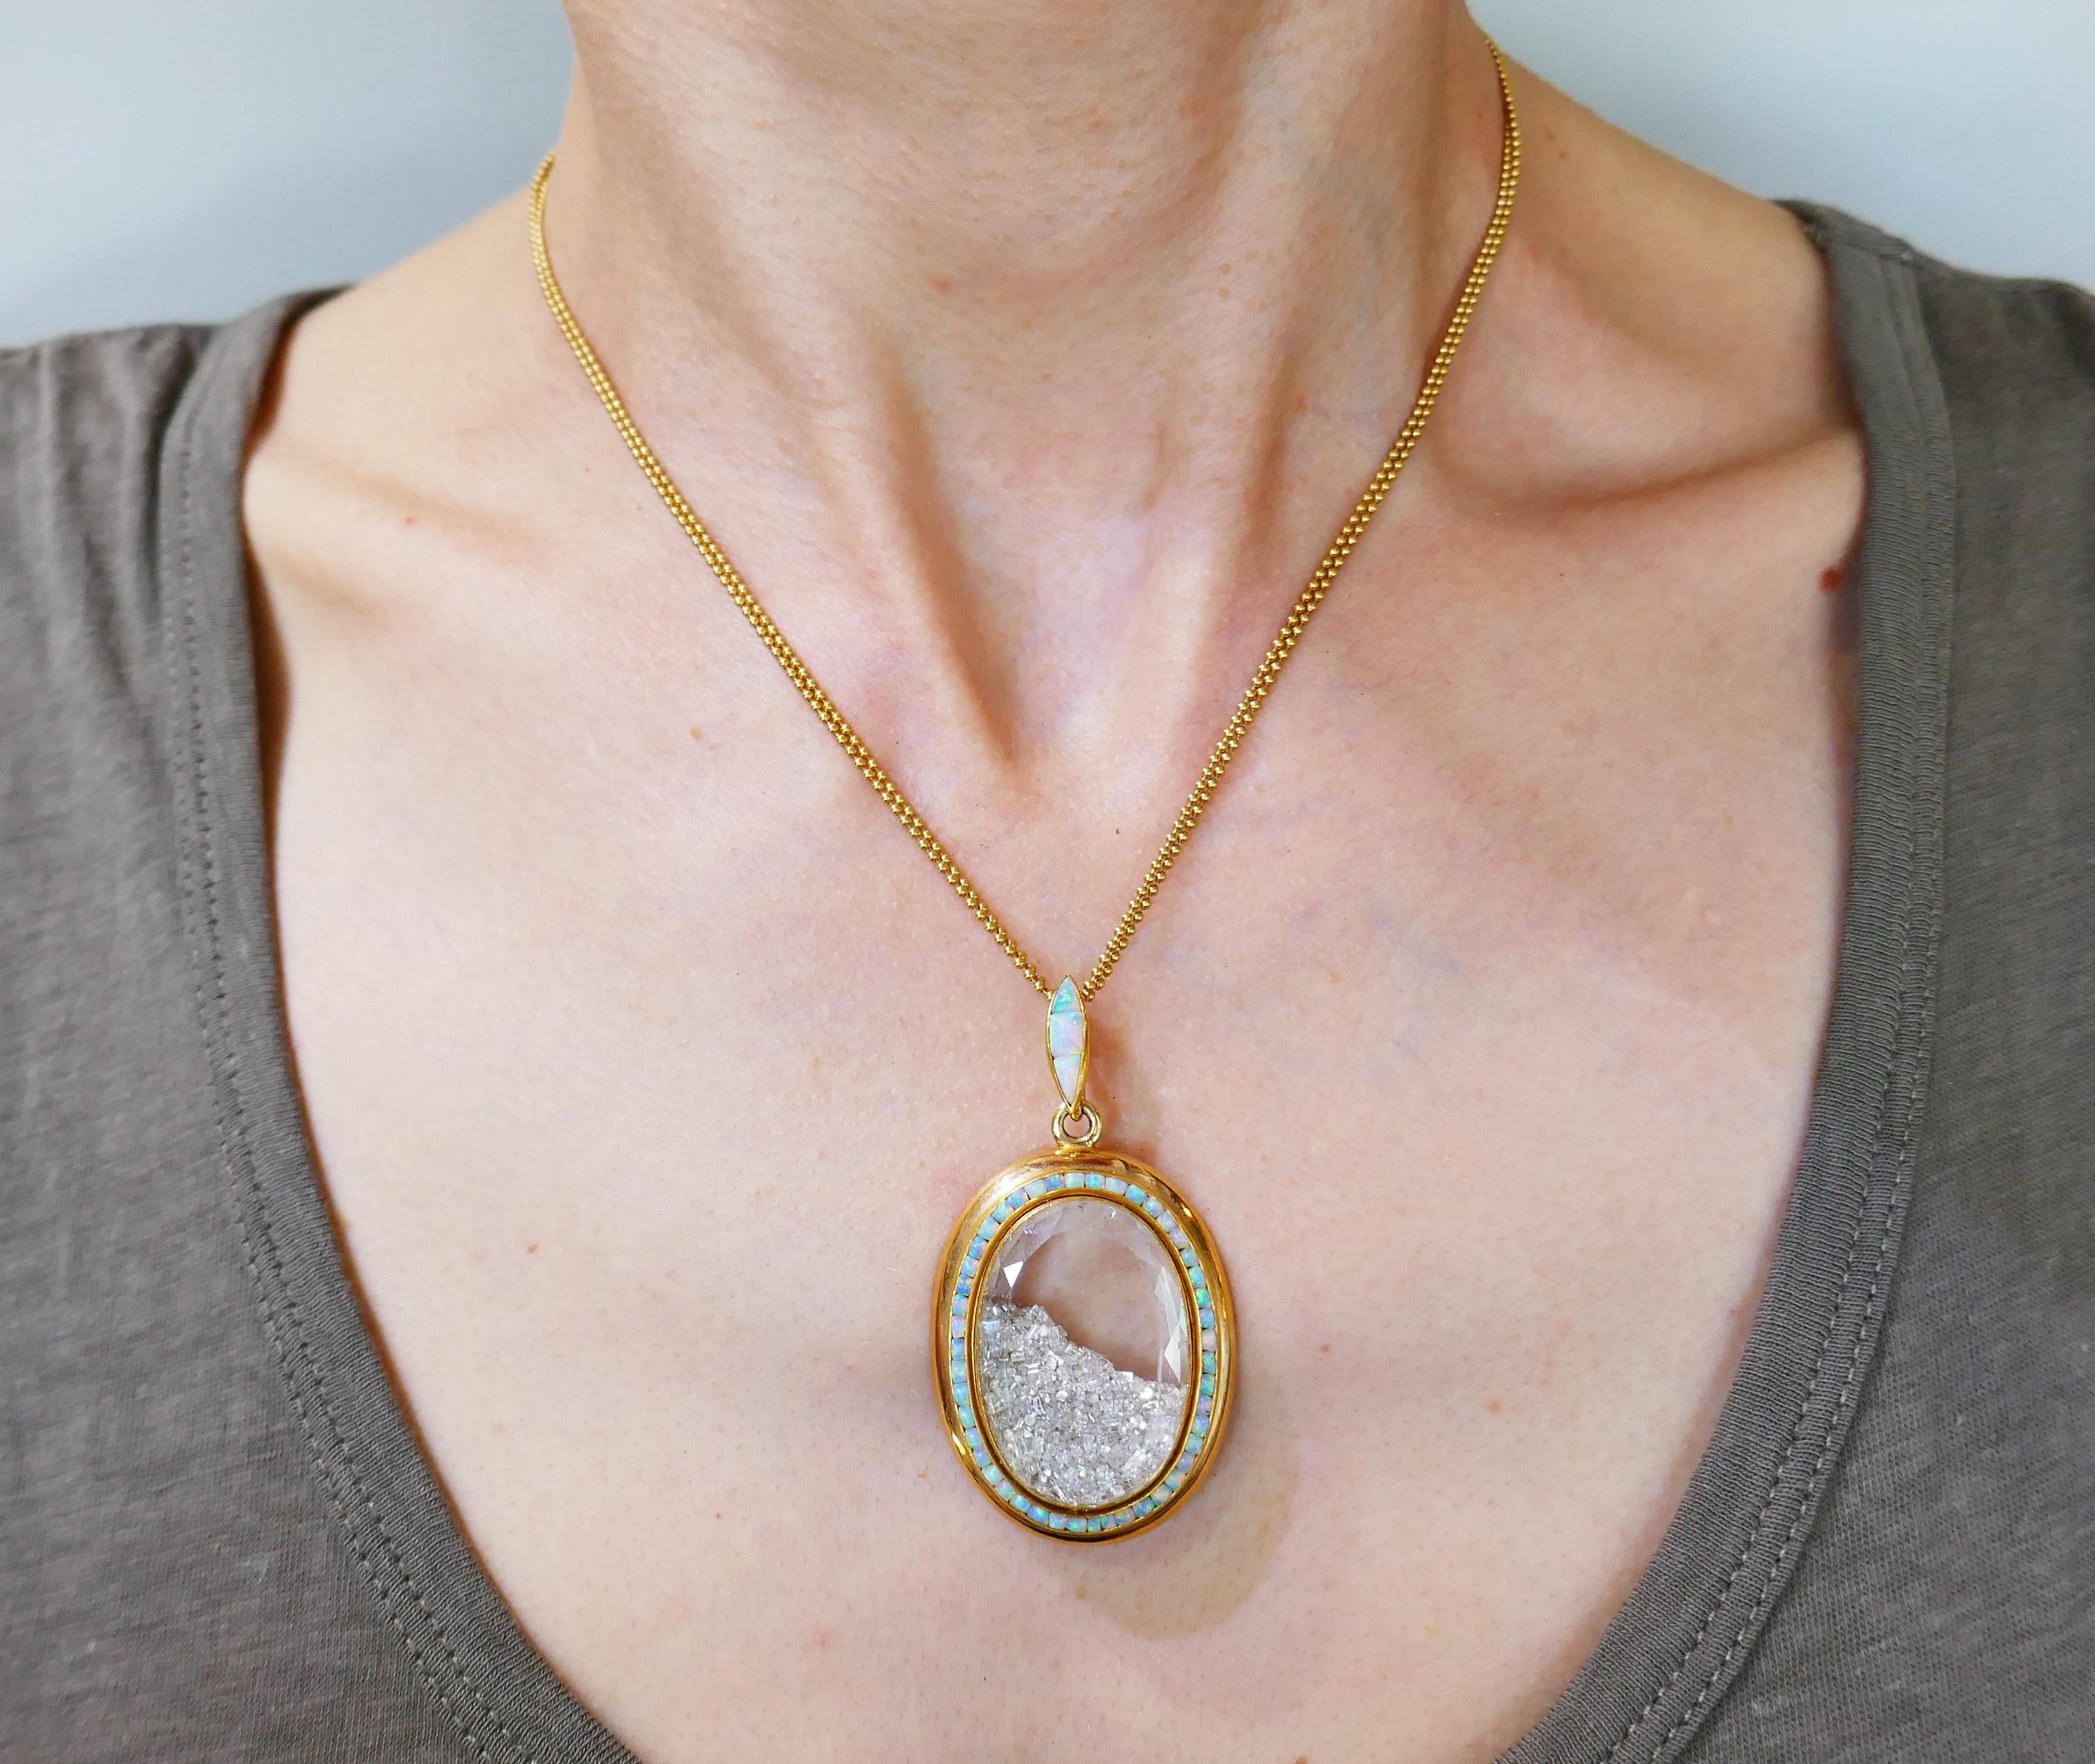 Signature Renee Lewis Diamond Shaker necklace. Elegant, feminine and wearable, the necklace is a great addition to your jewelry collection. 
The necklace is made of 18 karat yellow gold and carries 4.76 carats of diamonds tastefully haloed with